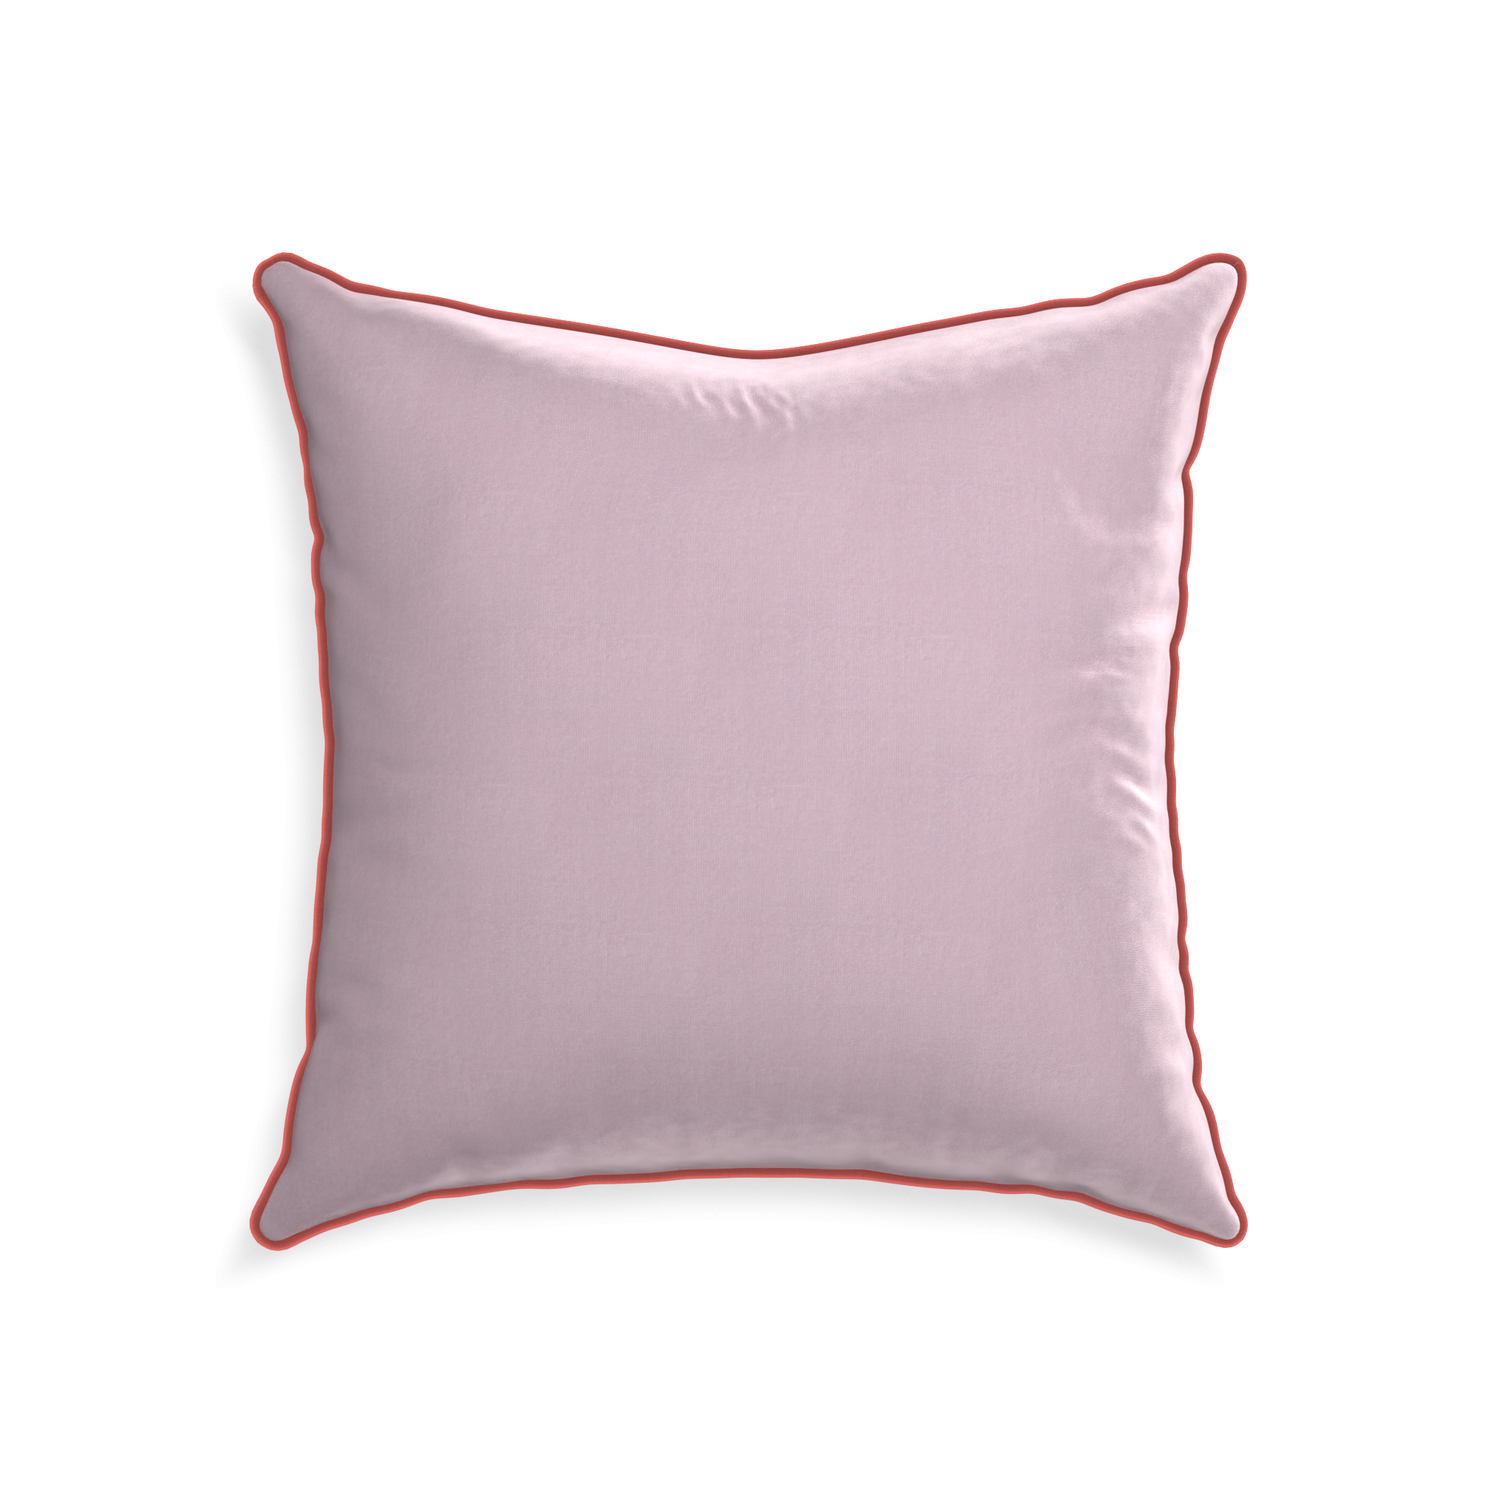 22-square lilac velvet custom pillow with c piping on white background